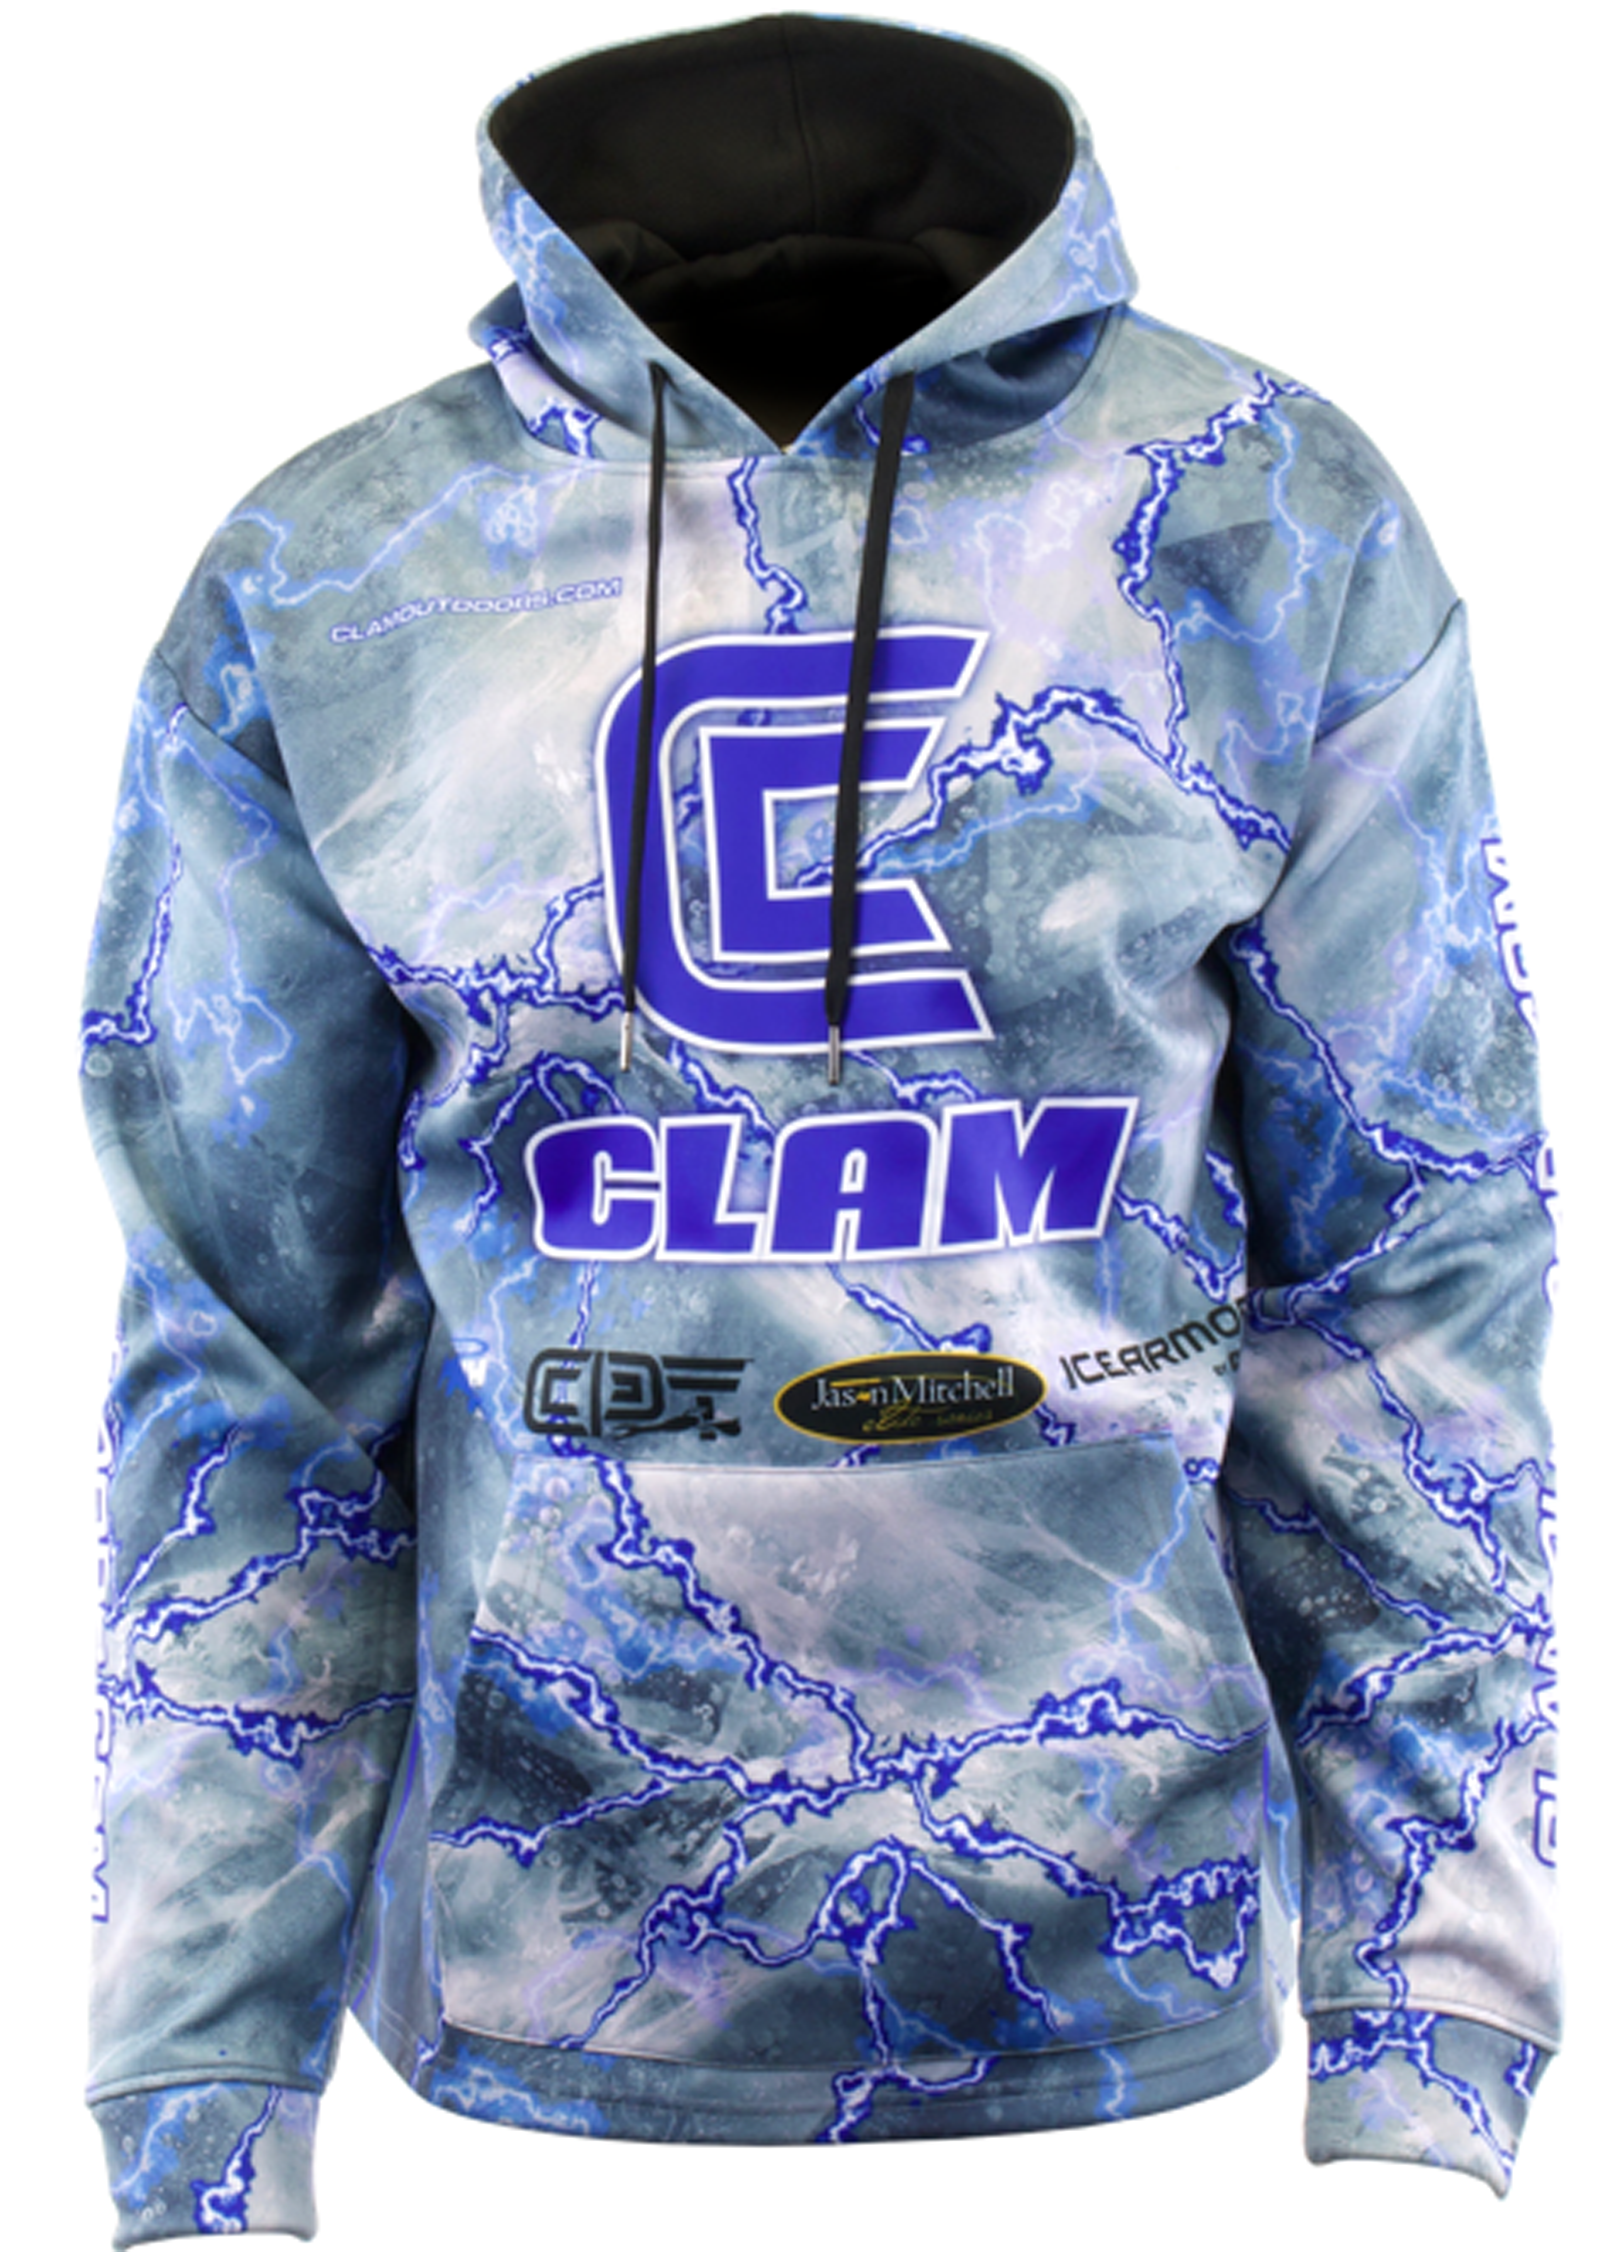 https://static.upnorthsports.com/Image/catimages/clamprohoodie2020-1600.png